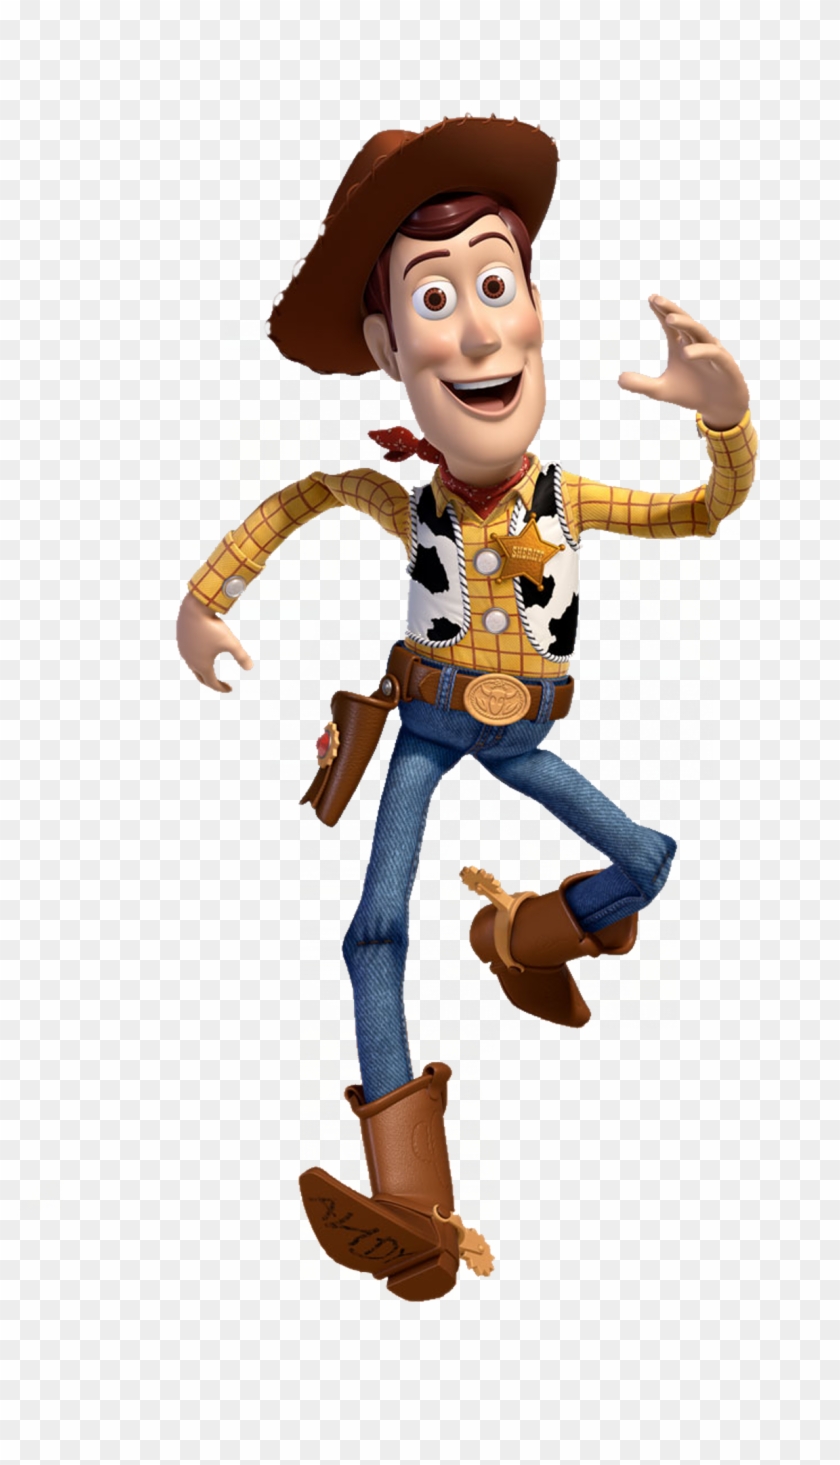 Image Gallery Of Toy Story Woody And Buzz Png - Toy Story 3 #750700